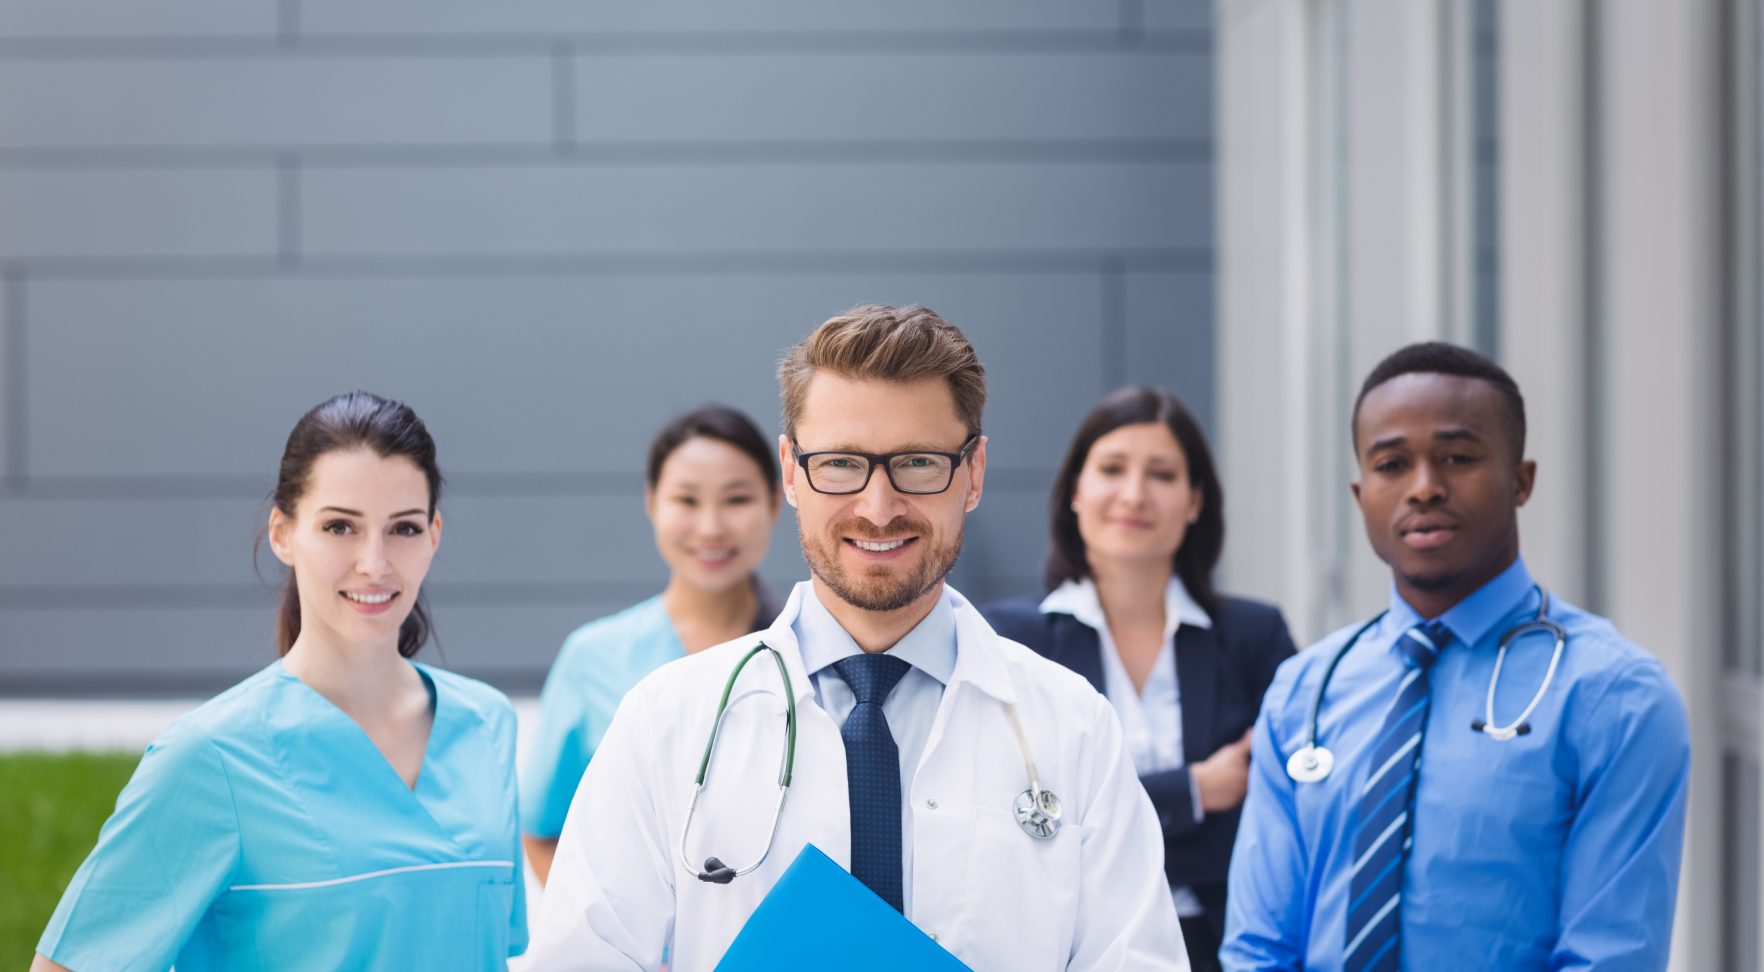 How can group practices cultivate a positive work environment to ensure patient satisfaction?